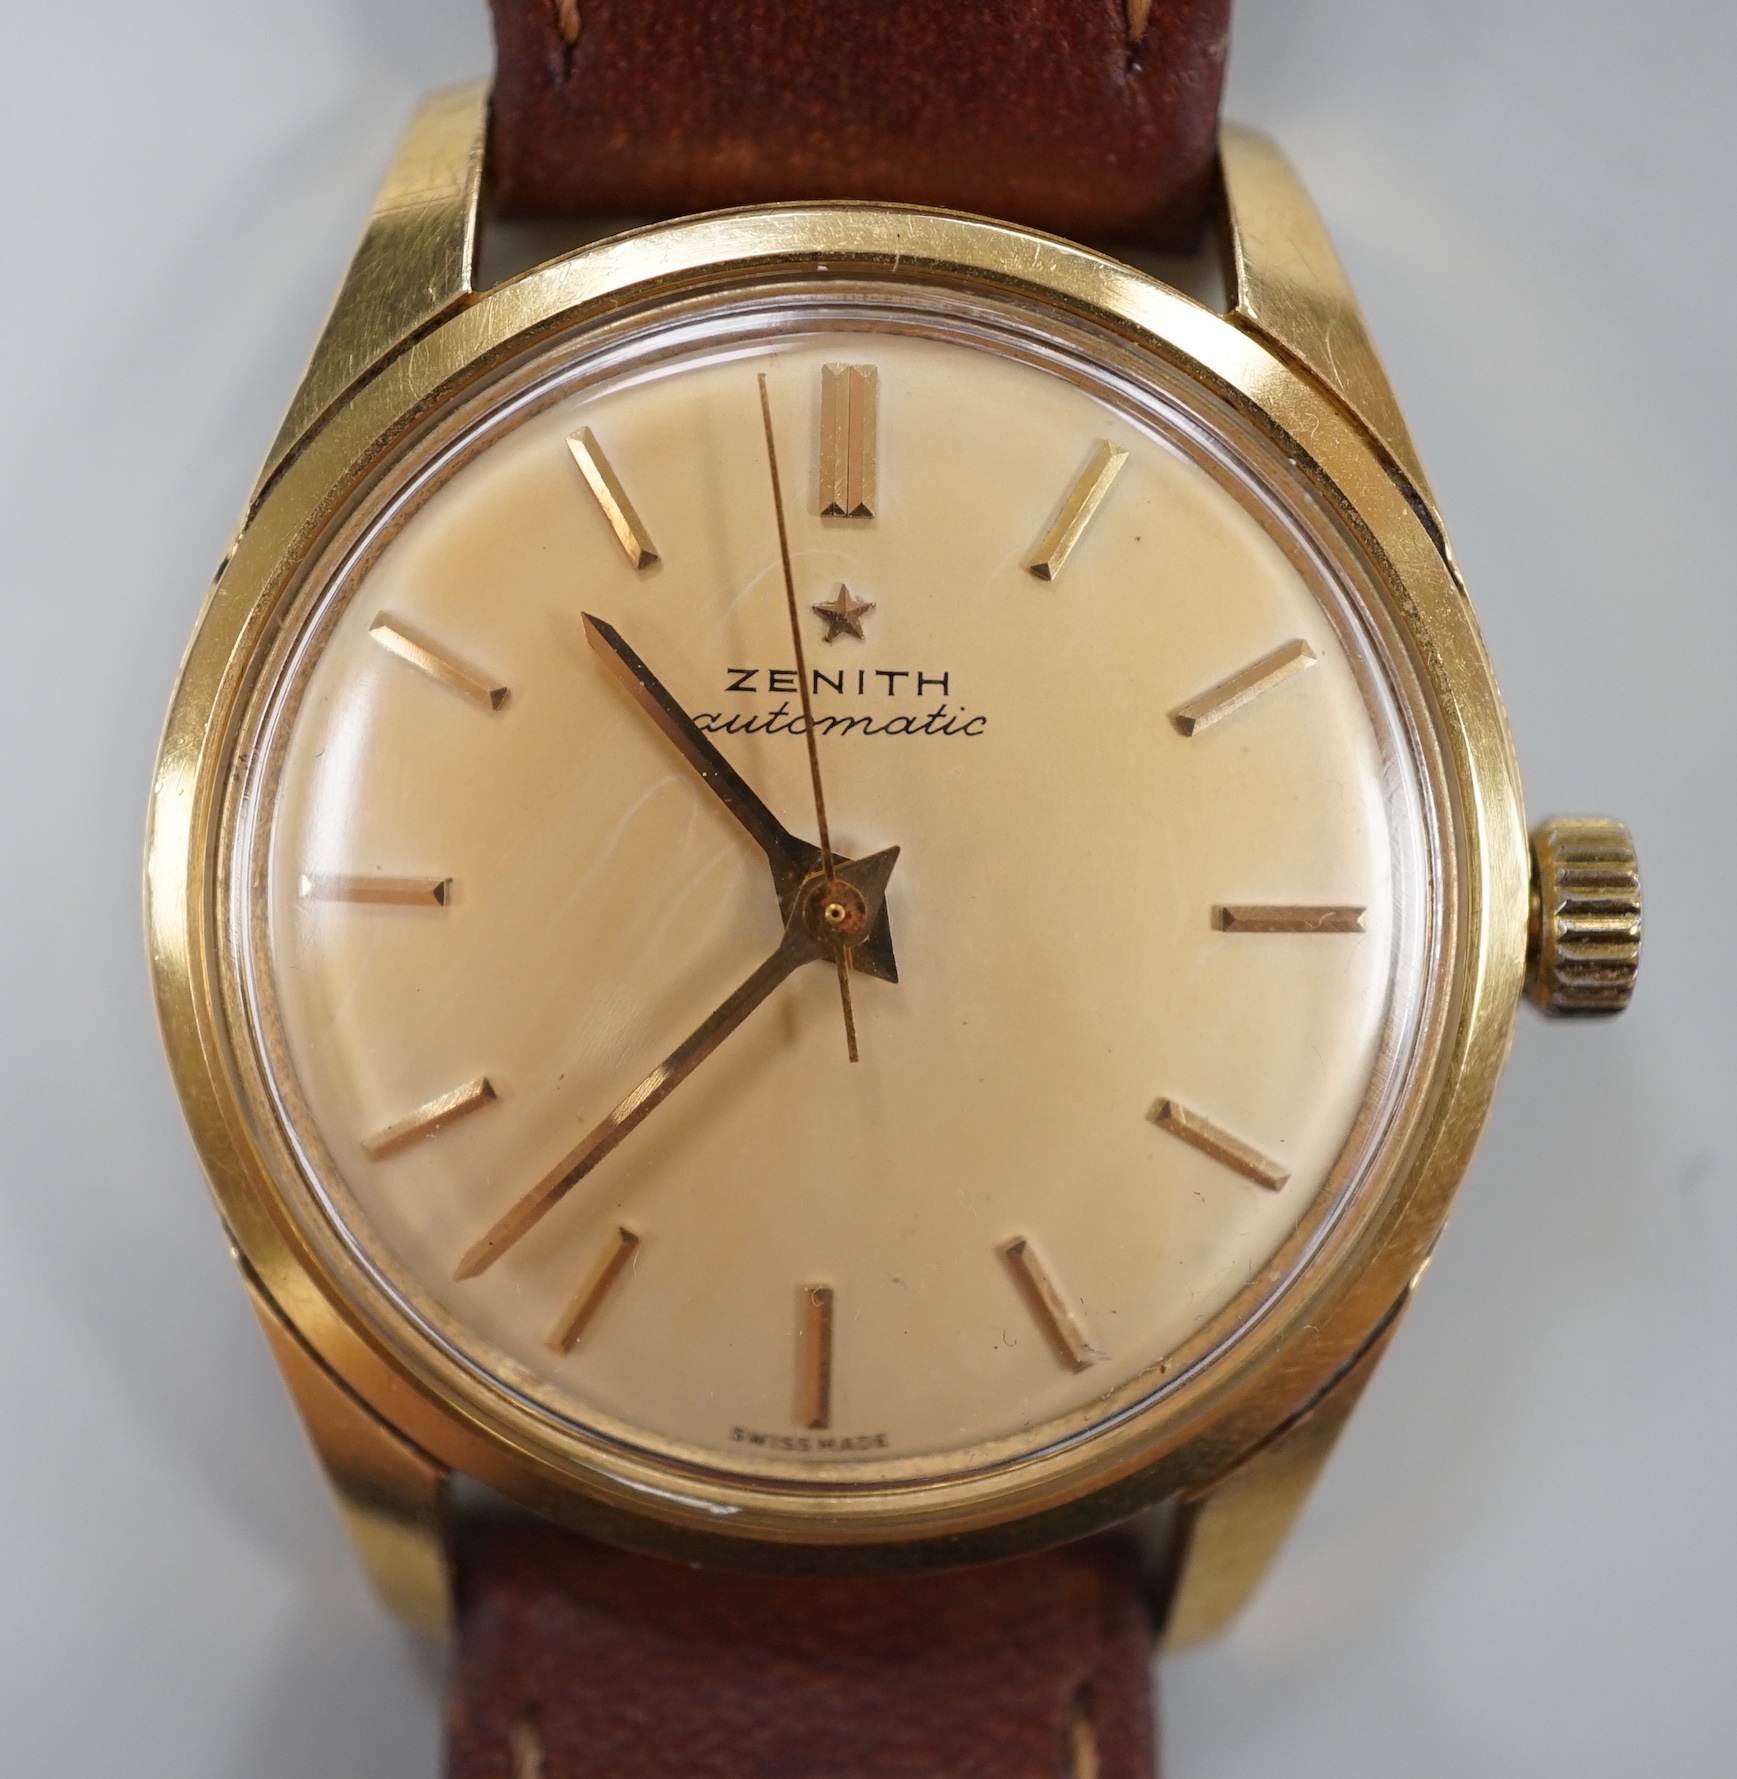 A gentleman's 18ct gold Zenith automatic bumper movement wrist watch, on associated leather strap, case diameter 33mm, no box or papers.